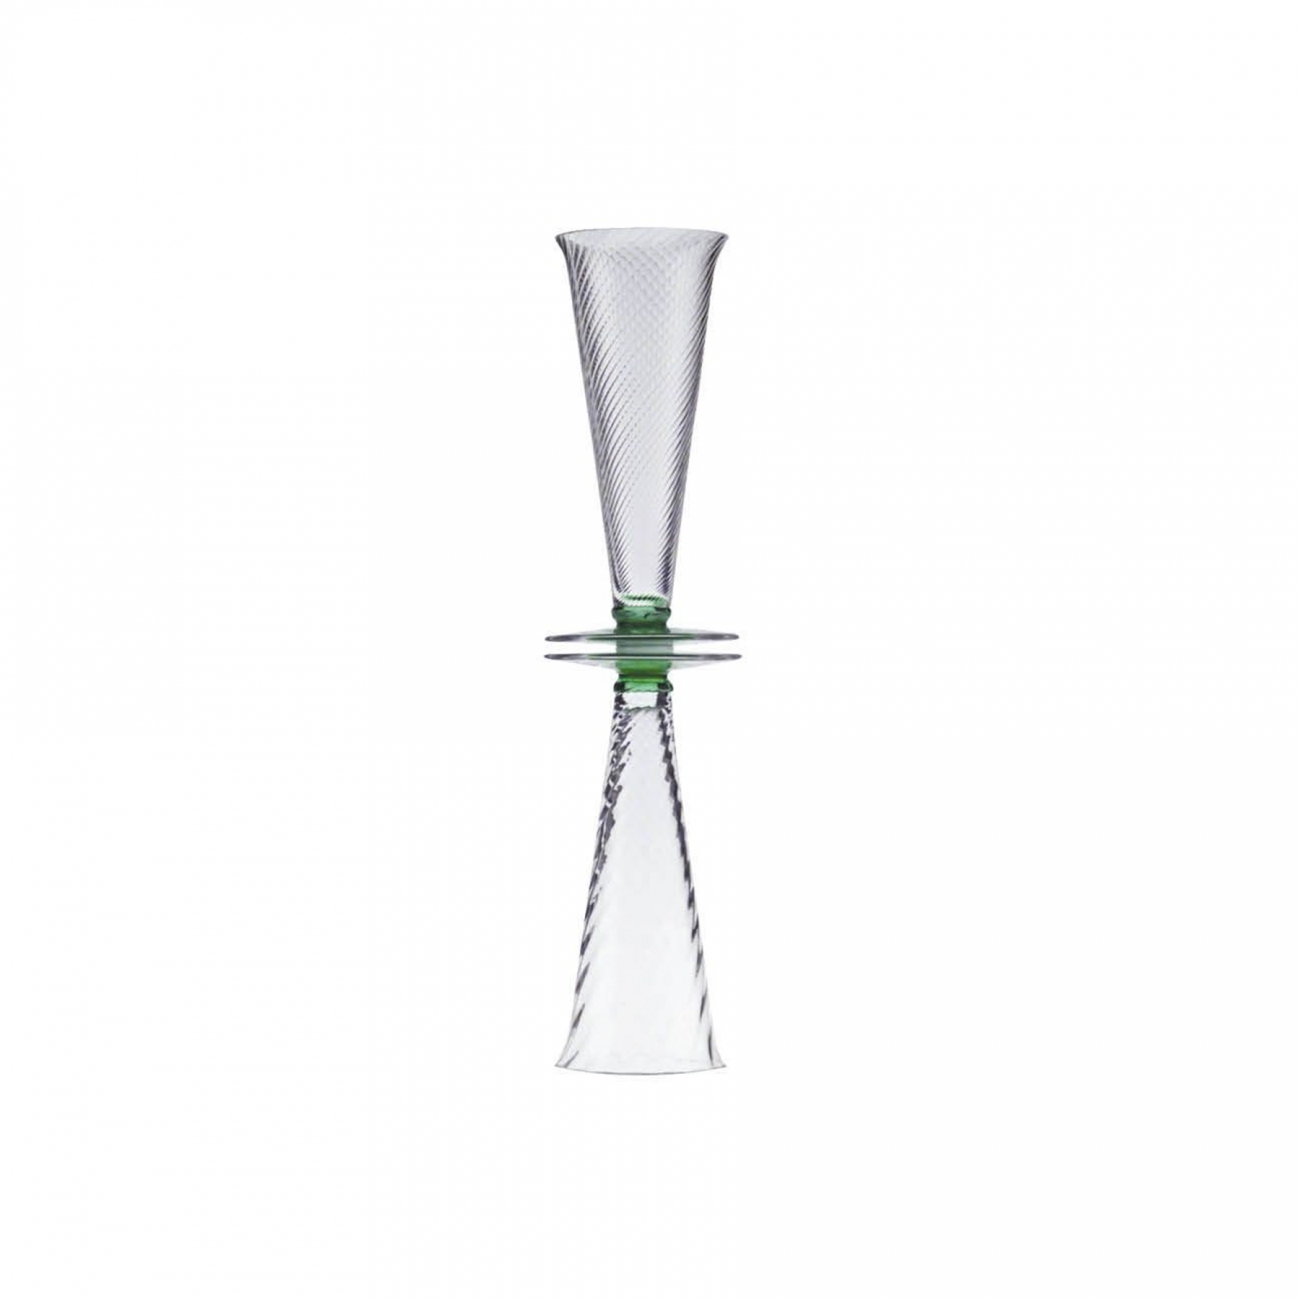 Driade Babal Collectible glass